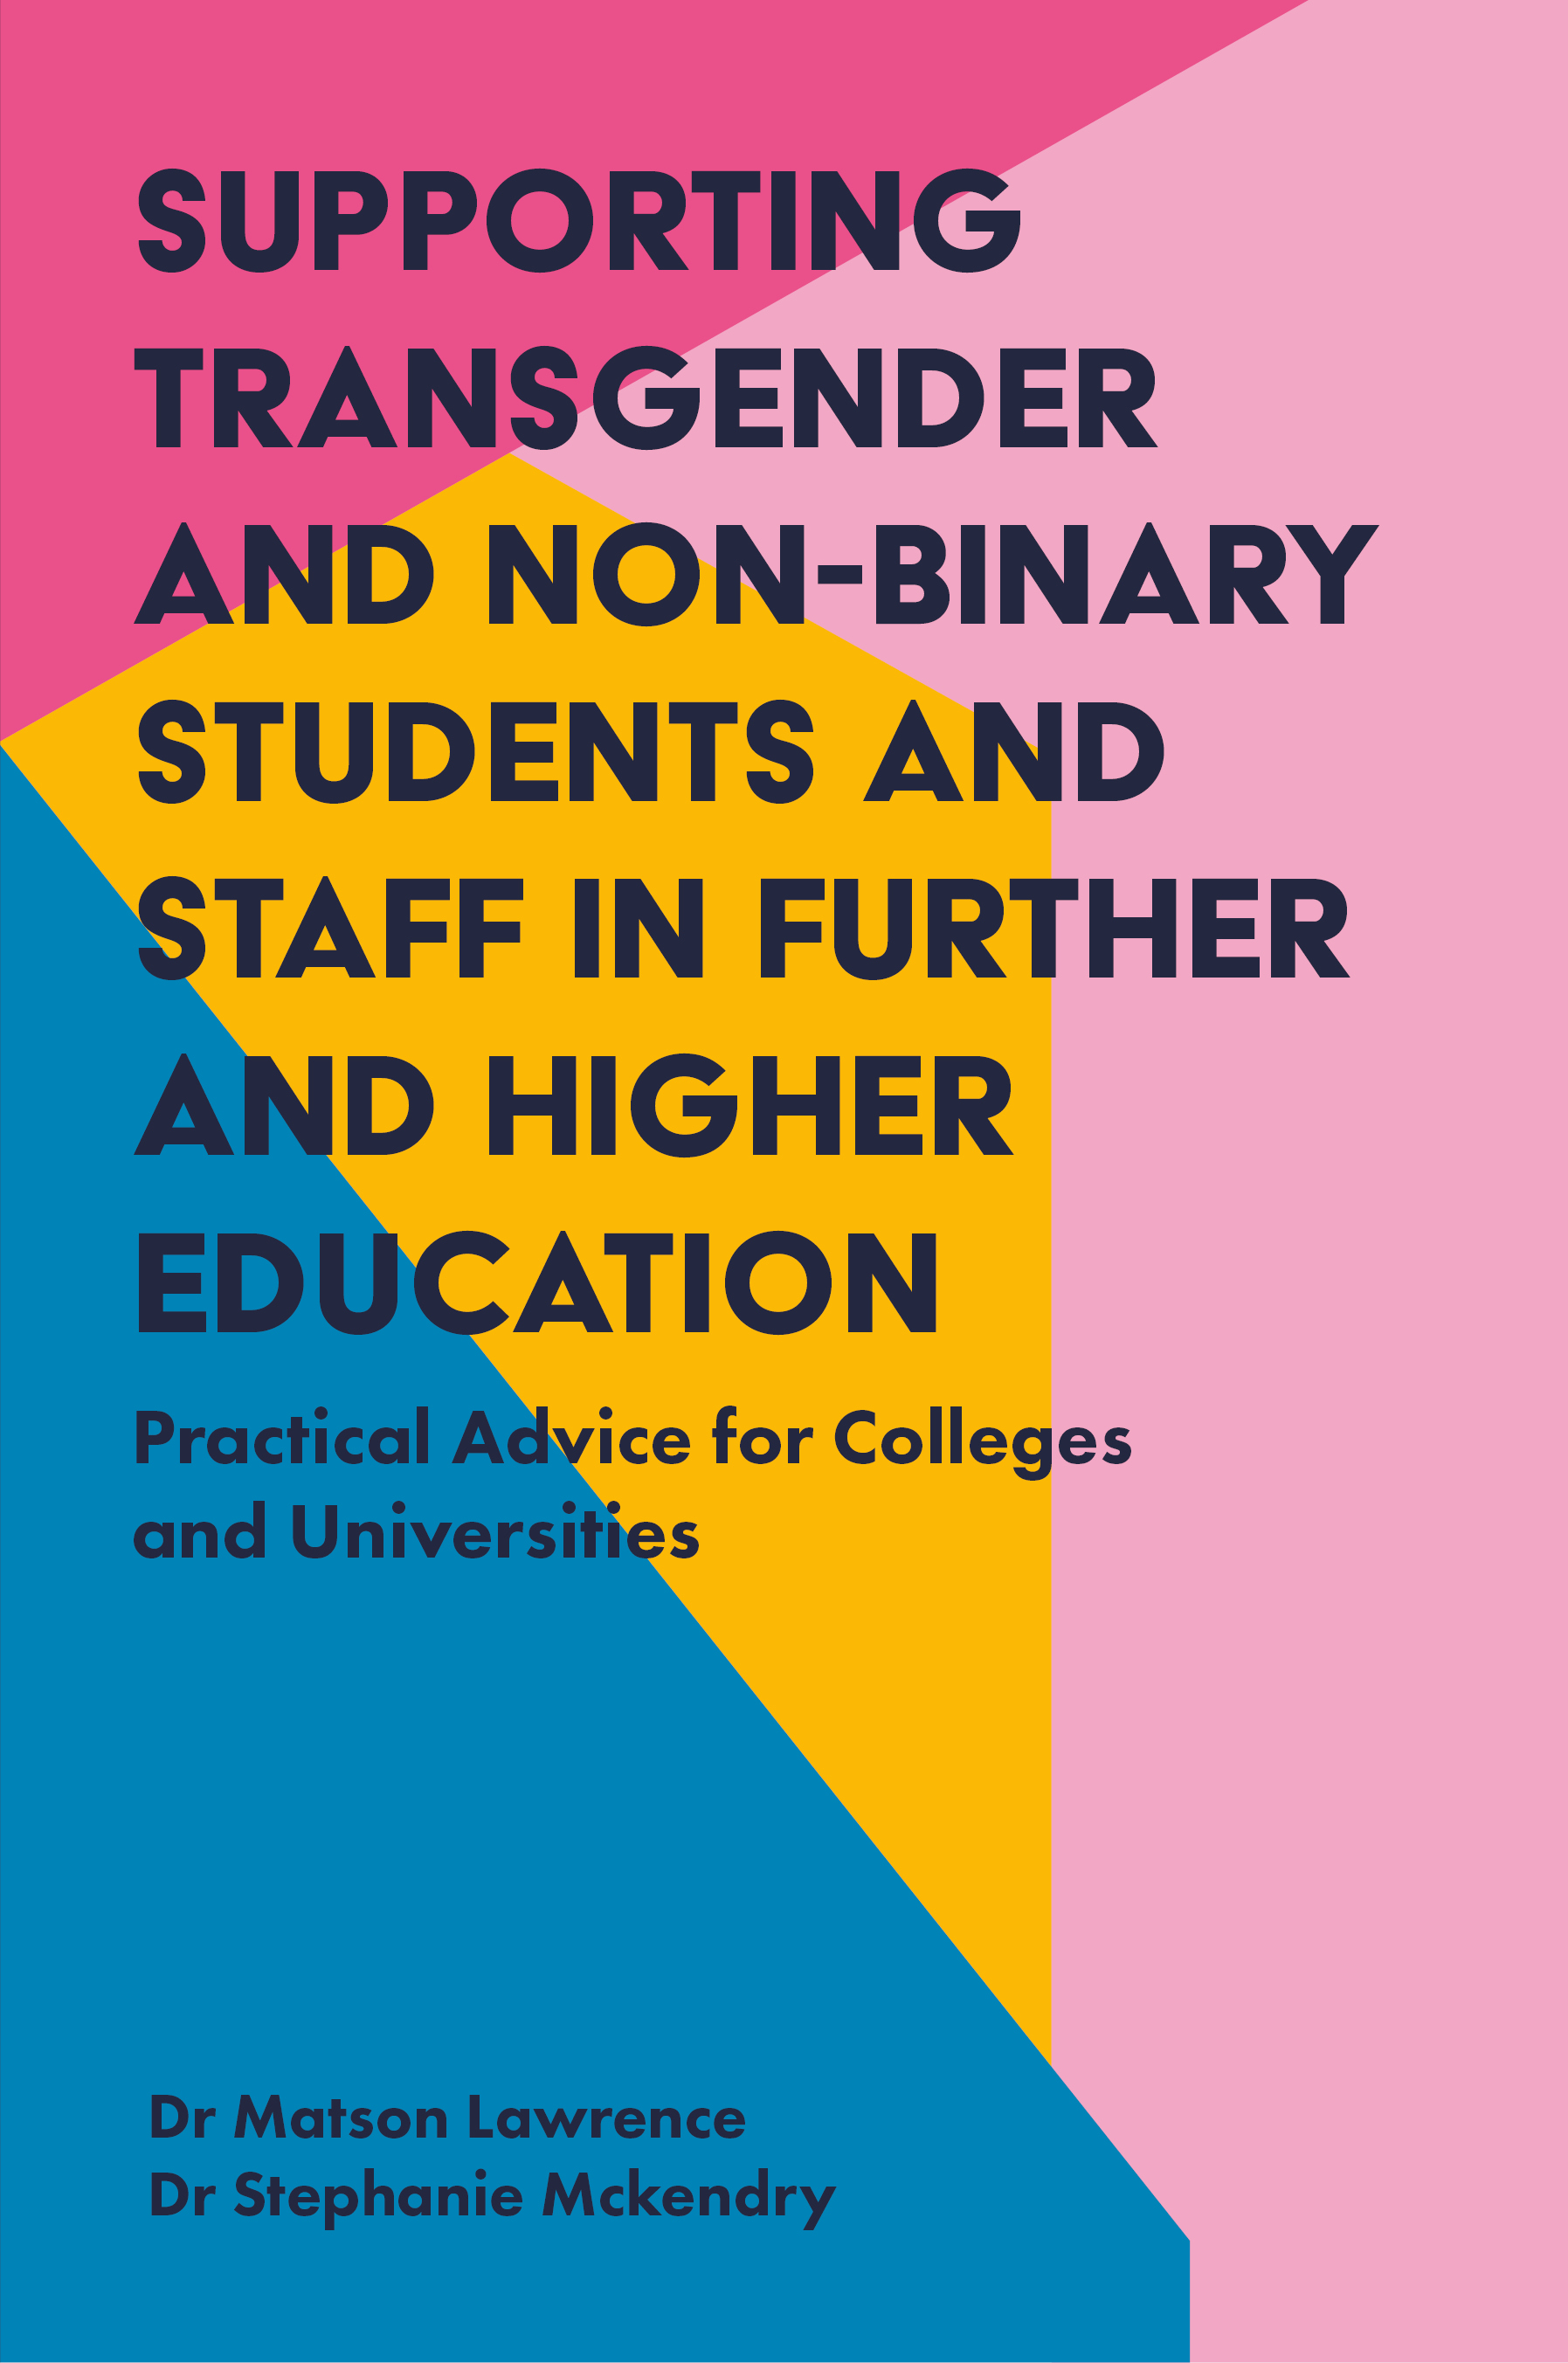 Supporting Transgender and Non-Binary Students and Staff: Cover